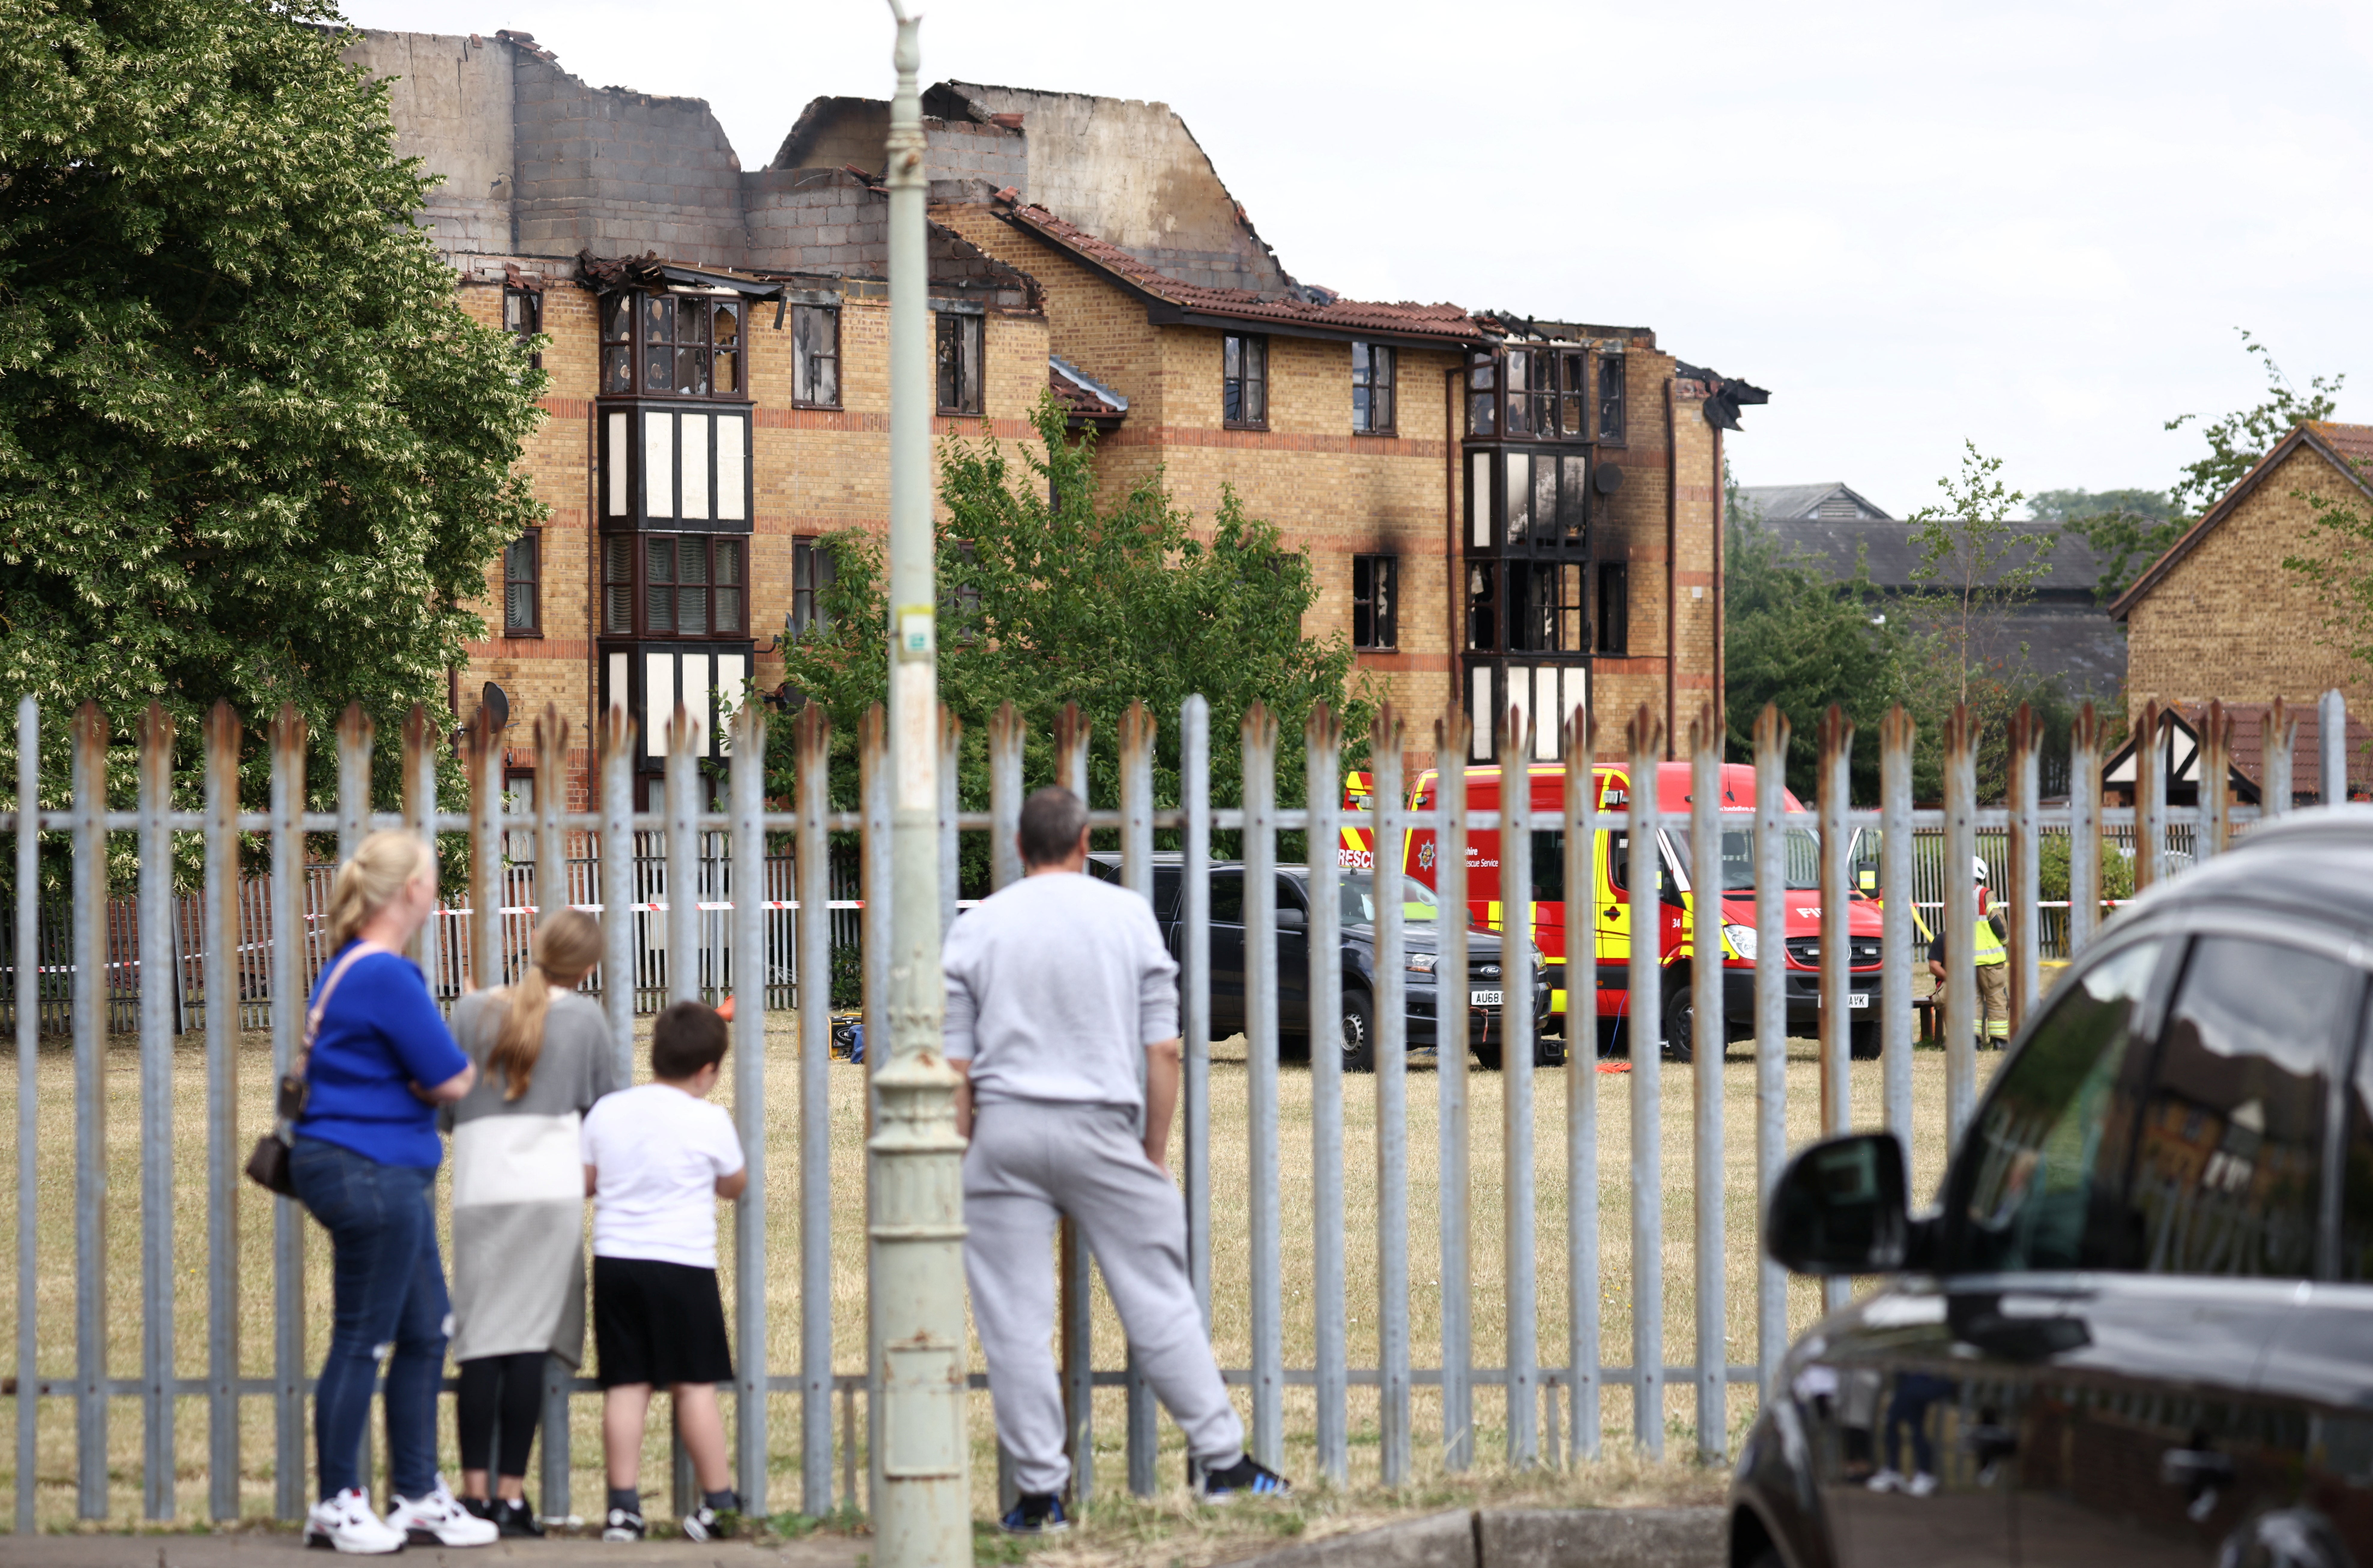 People watch the scene of a fire at Redwood Grove following a gas explosion